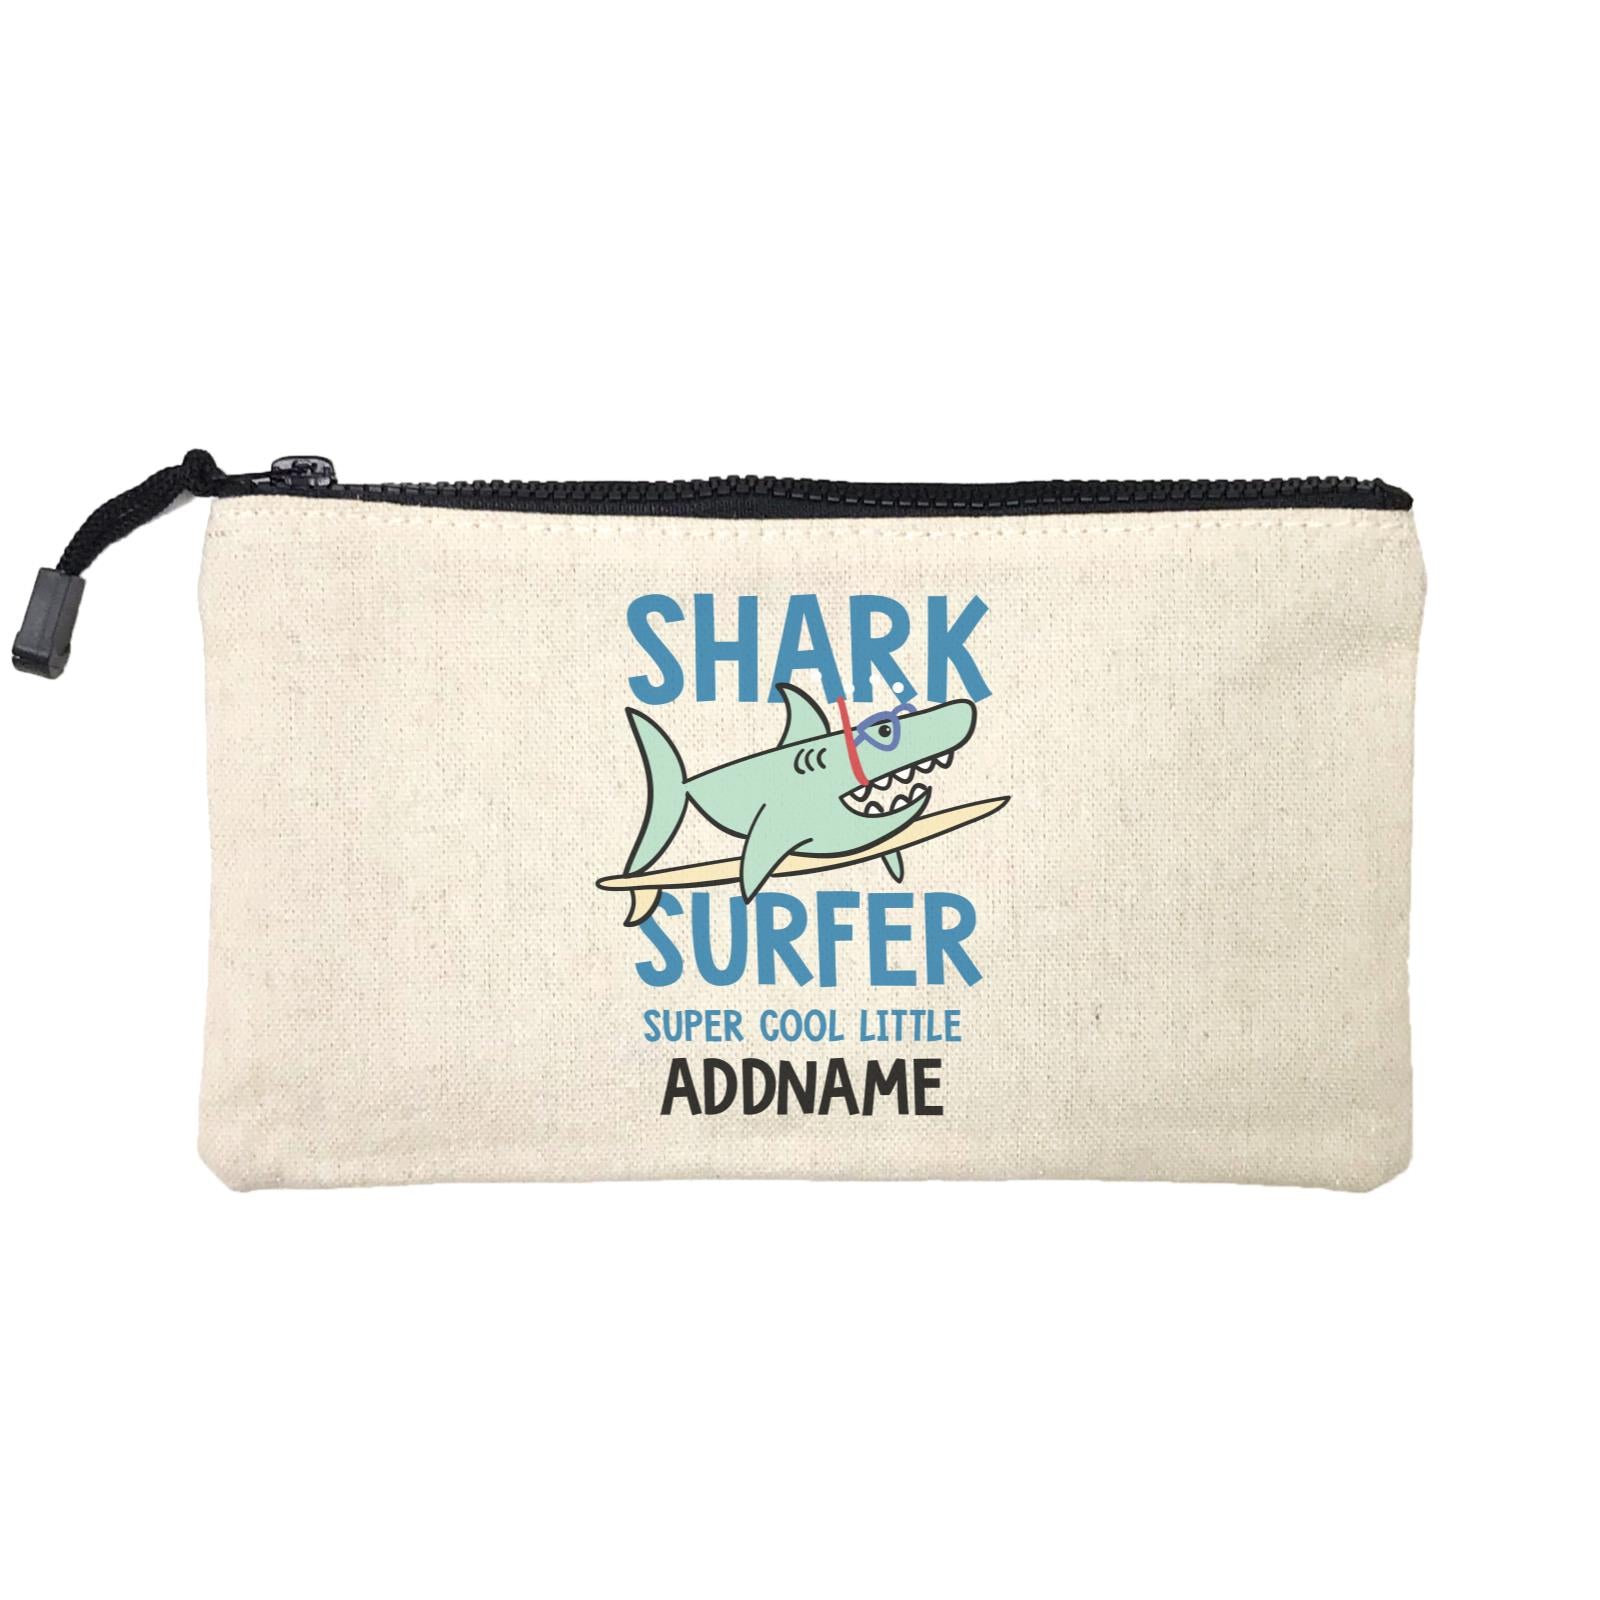 Cool Vibrant Series Shark Surfer Super Cool Little Addname Mini Accessories Stationery Pouch